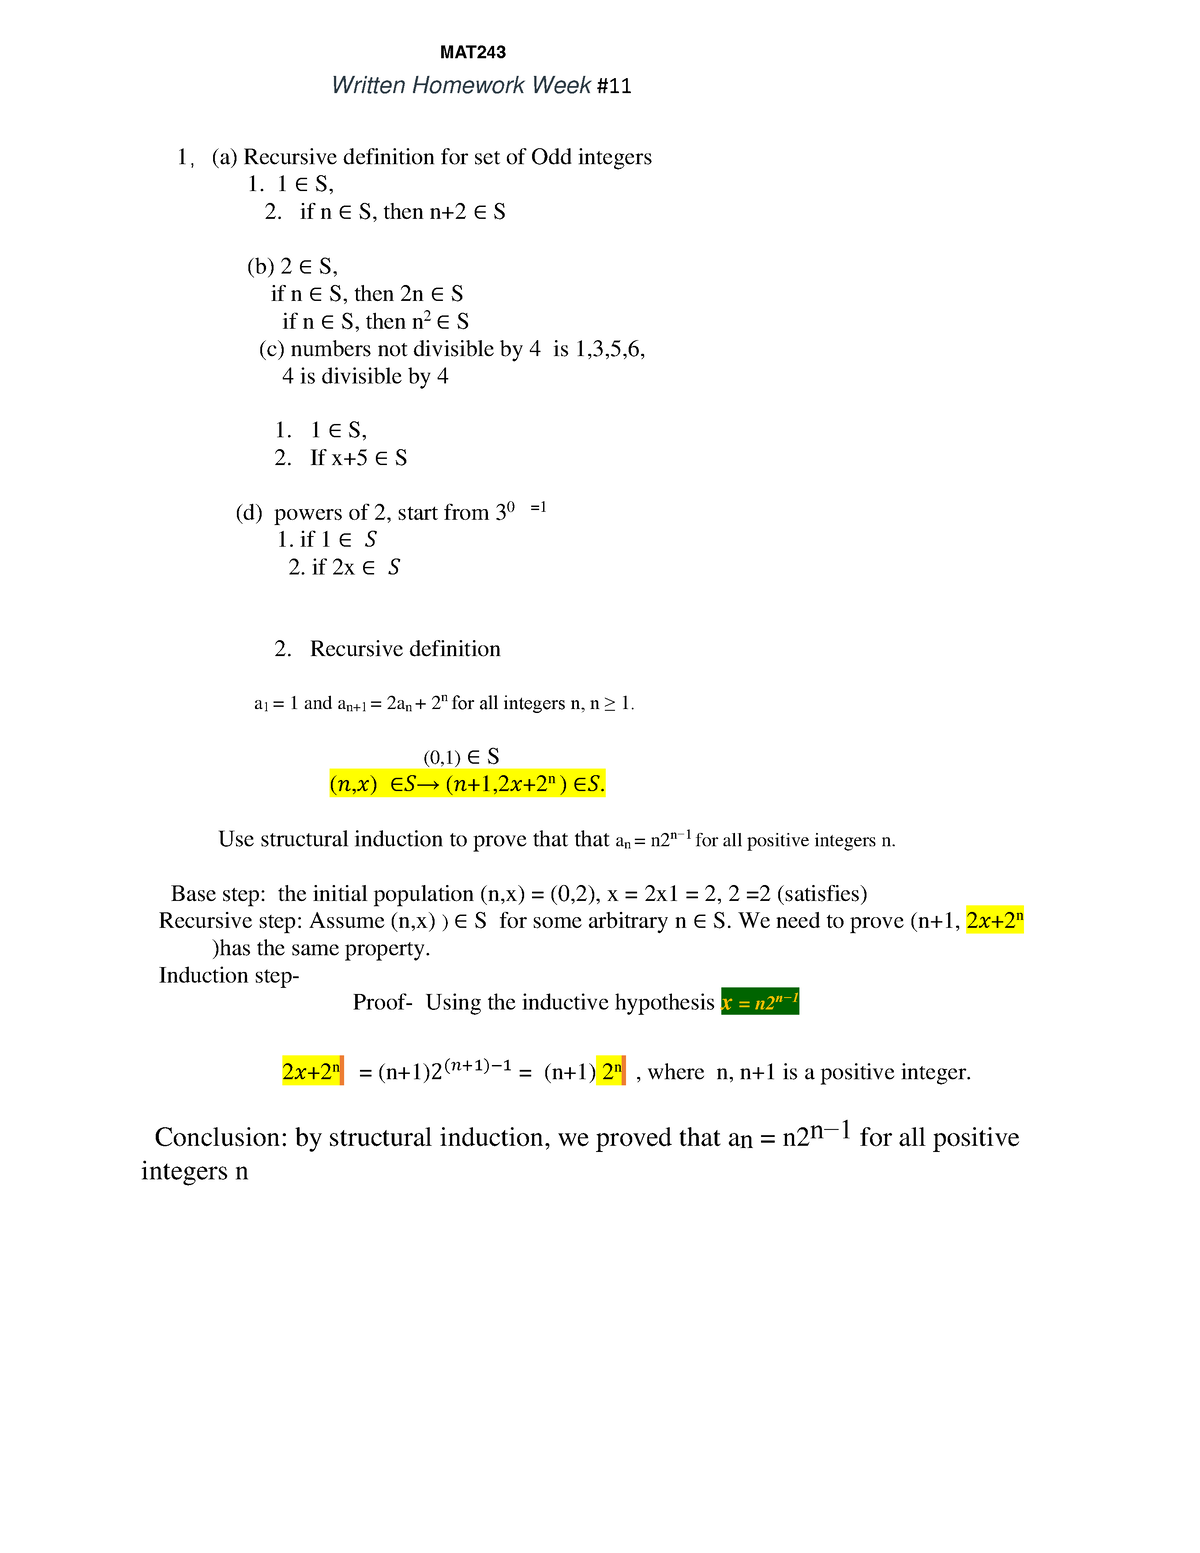 Lecture 3 - 1 ，(a) Recursive definition for set of Odd integers 1. 1 * S,  2. if n * S, then n+2 * S - Studocu